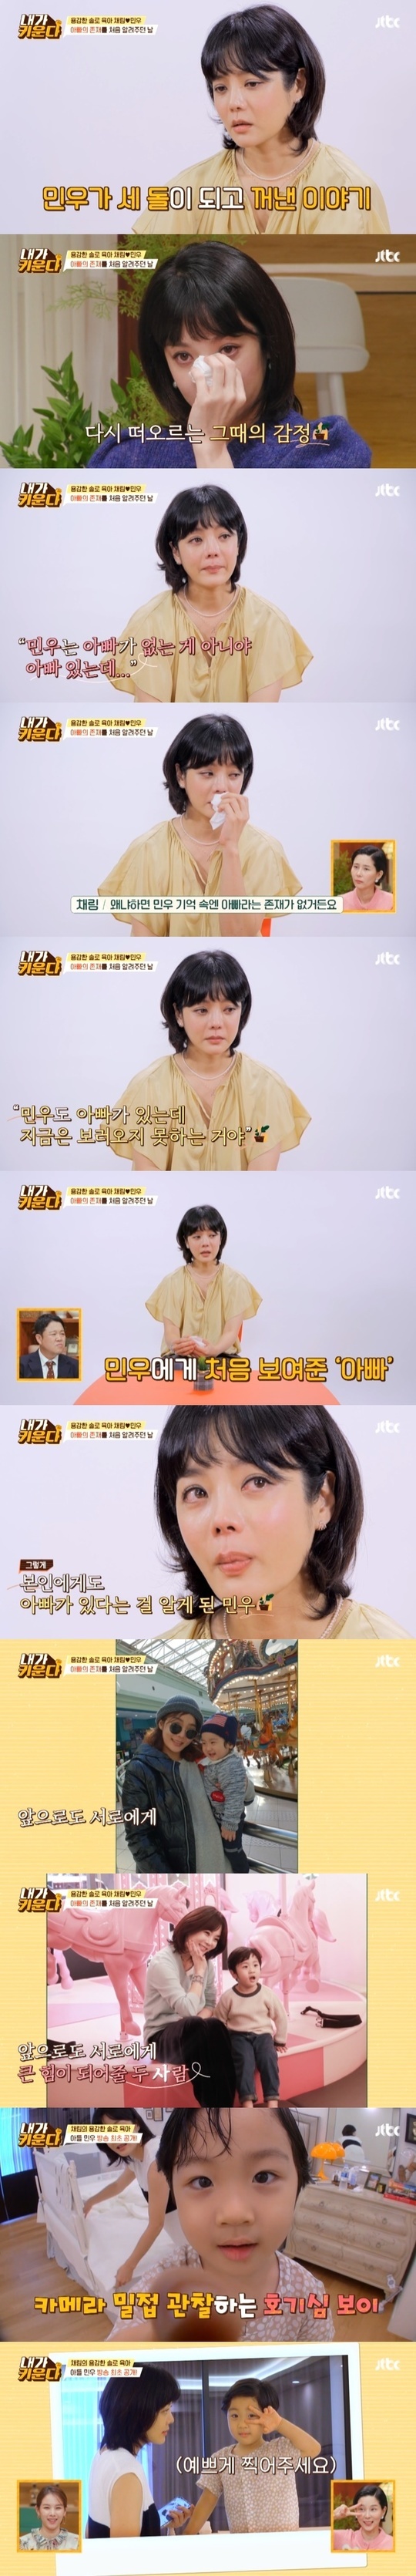 Chae Rim tears as she mentions ex-husband Jiame GaoIn the 11th episode of Brave Solo Parenting – I Raise, which aired on September 29, Chae Rims parenting life, which raises 44-month-old 5-year-old son Min-woo (Iden), was portrayed.On this day, Chae Rim was fortunate to have been busy working as a teenager, ahead of his first public appearance.Chae Rim, who has been successful in Korea and China since appearing in a number of popular dramas, has got a big gift called son Minwoo in the victory in China.Chae Rim said that he started solo parenting just after Minwoo was born, saying, I was (originally) fearless, gallant and fearless.But there were so many things I feared after I had a child. It wasnt do it or not.It was really bad, he said, revealing the past that had to do the parenting alone.Chae Rim unveiled a gift she had prepared with her child Father in the hope that she would have kept her innocence for the rest of her life before her child was born.It was a picture poster representing the Little Prince, followed by a hand letter written by Father and mother.Naturally, son Minwoos father and Chae Rims ex-husband Actor Jiame Gao were mentioned.Asked if the child knew about Fathers existence, Chae Rim said: I had an explanation for five years old.In fact, I always felt (the child) why does not my house look like Father? When I go outside, I stare at the children with Father.I didnt have to say it, so I felt it, so I asked, Do you want to see Father, Minwoo? And at first, he said, No.Chae Rim, who soon showed tears, said, I said, Minwoo does not have Father. There is Father. And the childs expression changed. Do I have Father?I asked, Because theres no father in Minwoo Memory. Minwoo Father. But now he cant come to see. And he showed me the picture.I kept watching. Father? And I told him, Yes, Father. And then I went out and didnt see Family with Father. Chae Rim said, One day, while I was in the House of Representatives, my friend asked me, What is Minwoo Father?So Minwoo replied, Our Father can not come to China.Thank God, I was glad to tell you then, so I wanted this child to be able to cope like this.Now I have a day to deliberately talk about Father, and for a while I talk about Father.Then Minwoo hugged me and said, Thank you Mom.However, Chae Rim was doing a lot of parenting alone without any shortage, and Minwoo was also a bright, loving and lovely child.Minwoo, who was a good child since he was in his stomach, had curiosity in various fields such as earth, insects, dinosaurs, science, and English in a large-scale eating restaurant that eats five meals a day.Chae Rim showed Minwoo a customized parenting, such as setting up a 7-day table and conducting scientific experiments in the living room during the break.On this day, Chae Rim said of his education, I want to make it easier for my child to learn when I am young.If I learn as I originally knew, I would like to have a fast absorption rate.  I think I should educate China in earnest next year. The Parenting Act of Chae Rim, a brave mother who does anything for the development of her childs intelligence, is expected to be a different example for performers and viewers.